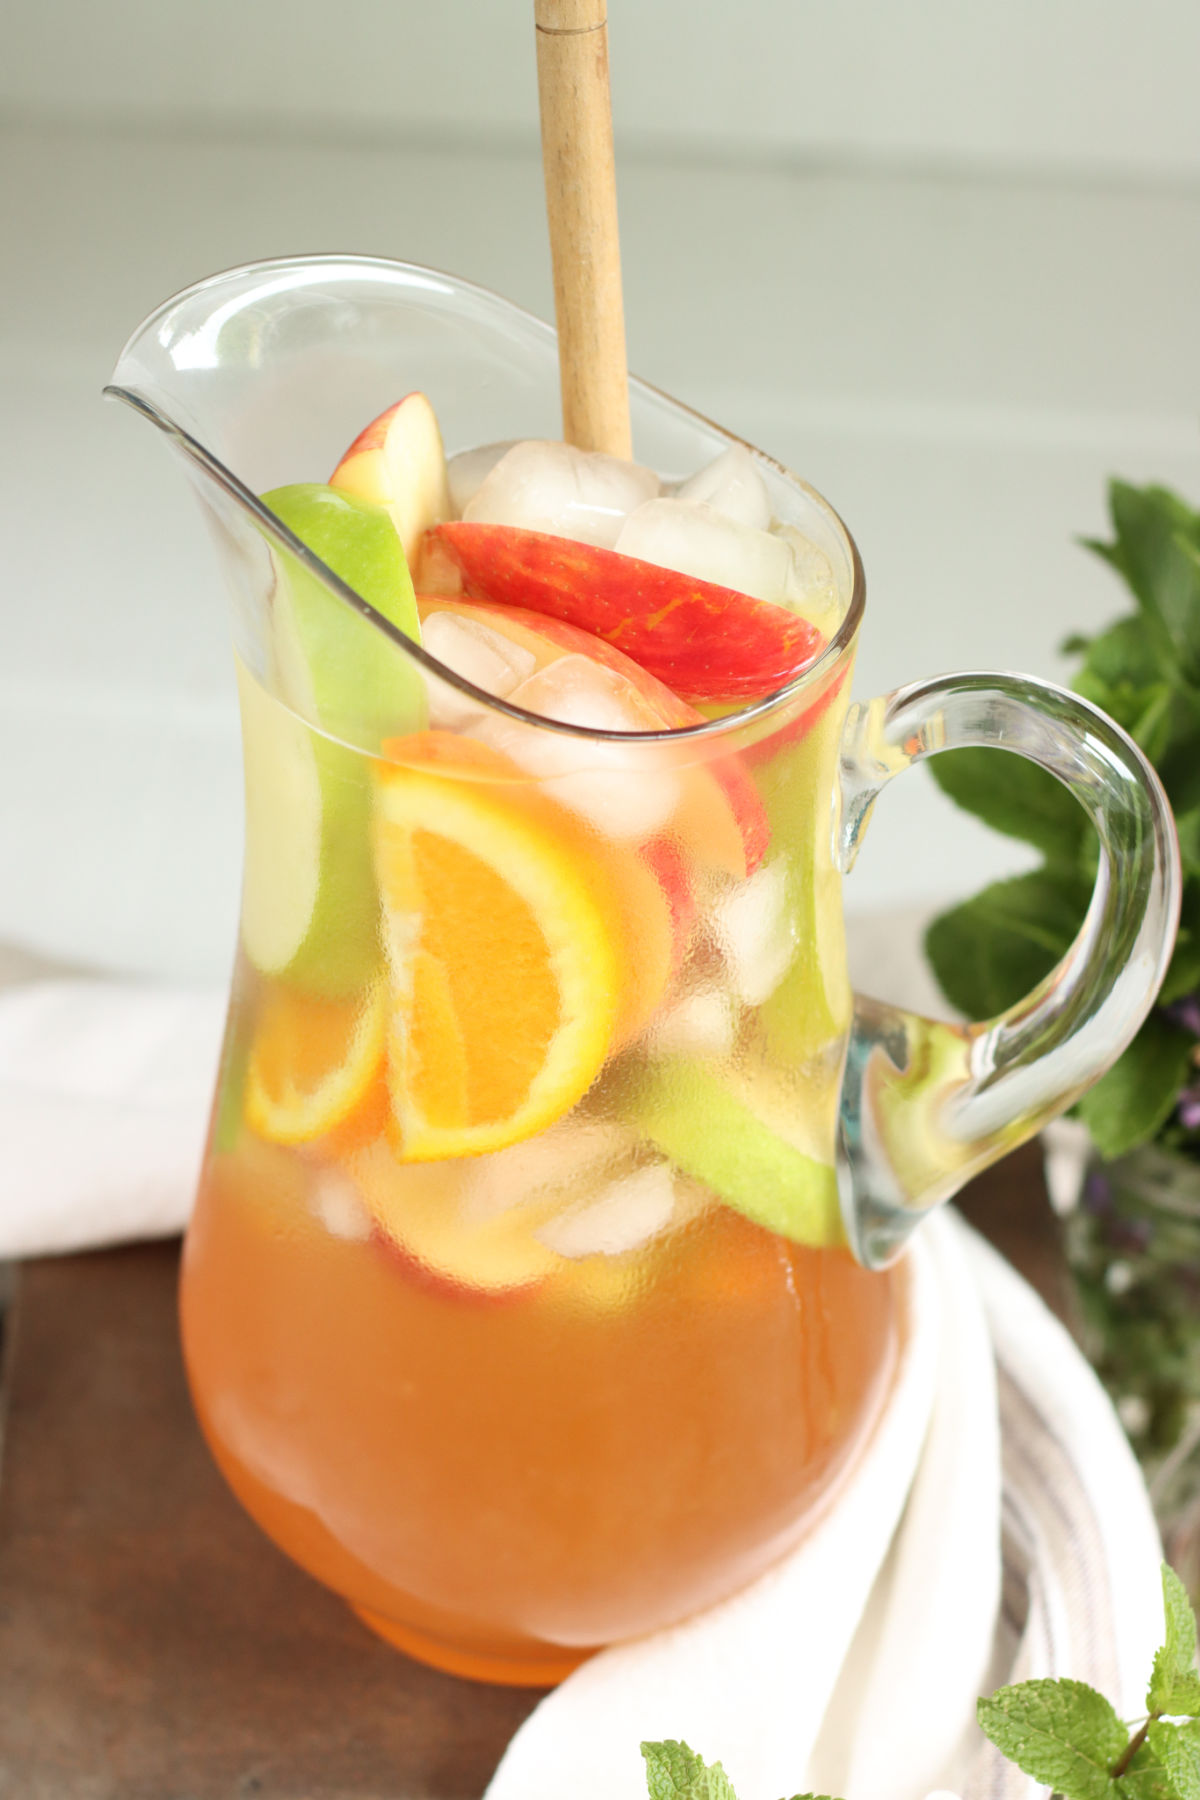 Glass pouring picture with sangria, orange and apple slices, wooden spoon in it.